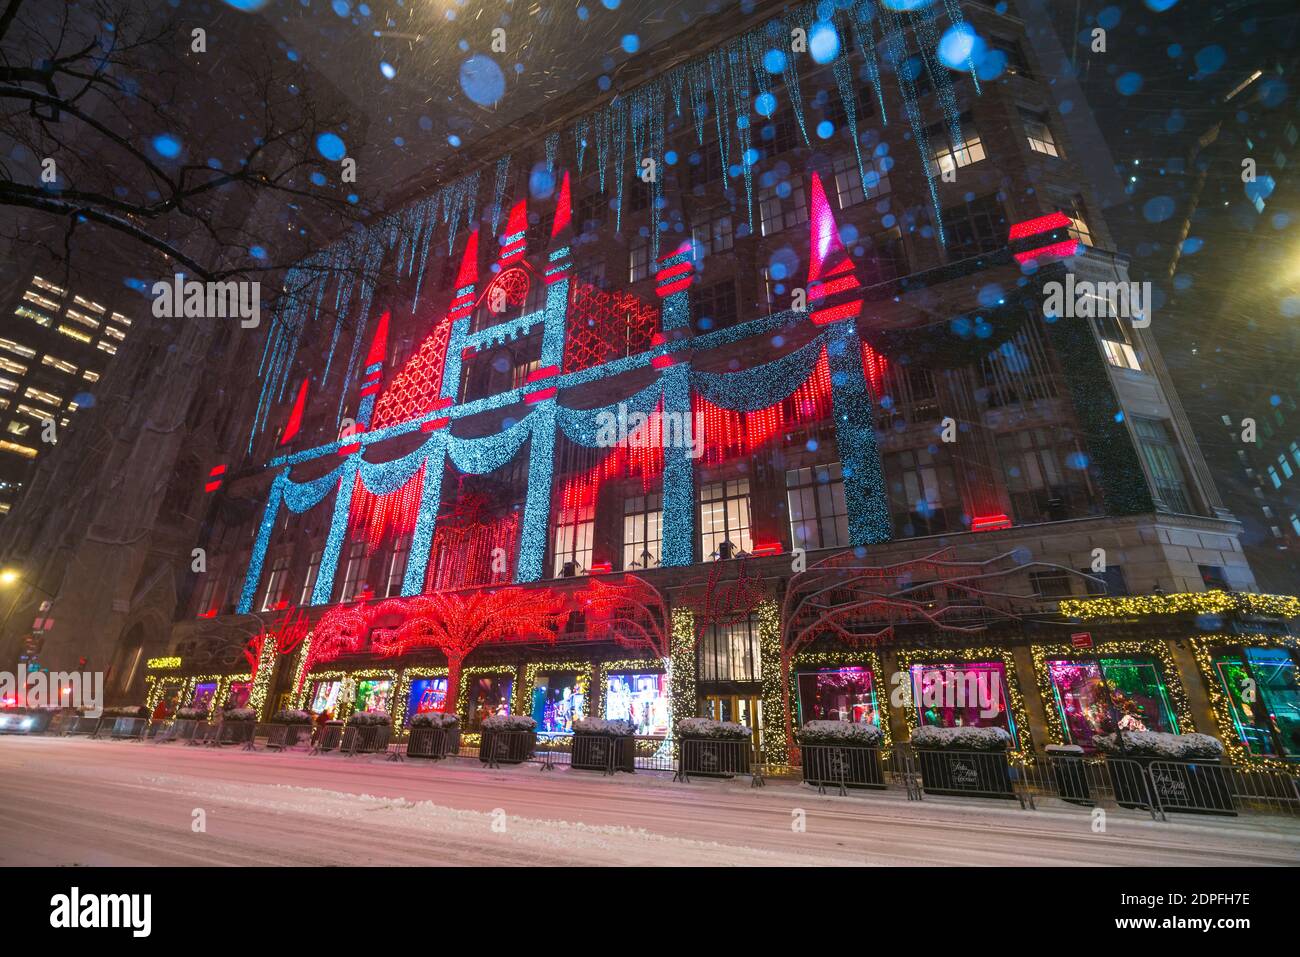 Saks 5th Avenue's Christmas Lights Show during snowstorm amidst COVID ...